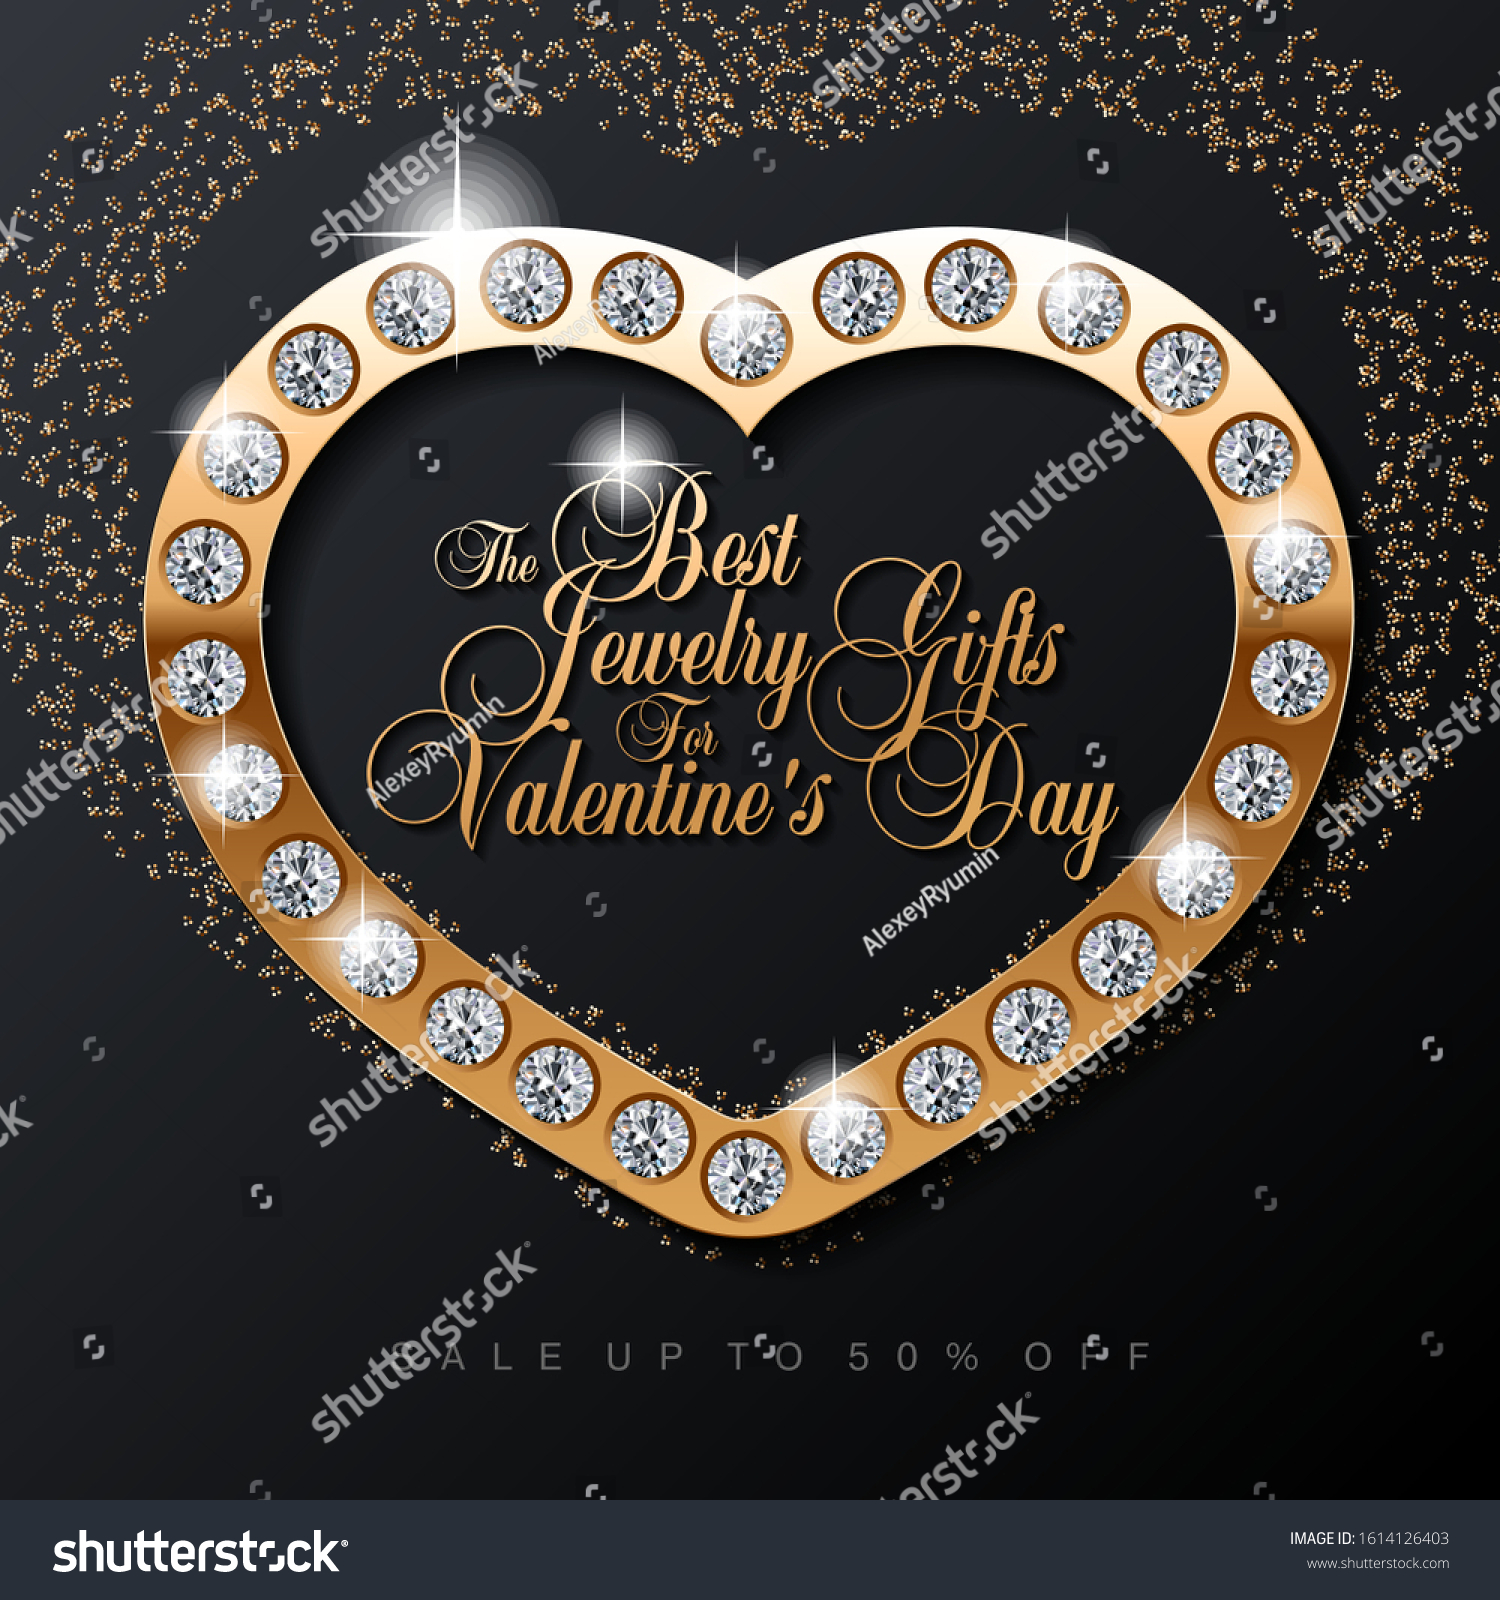 Luxury Valentines Day jewelry sale, special offer, discount, advertising campaign square vector banner, flyer, poster, voucher, social media post template with gold jewelry, diamonds and text on black background 